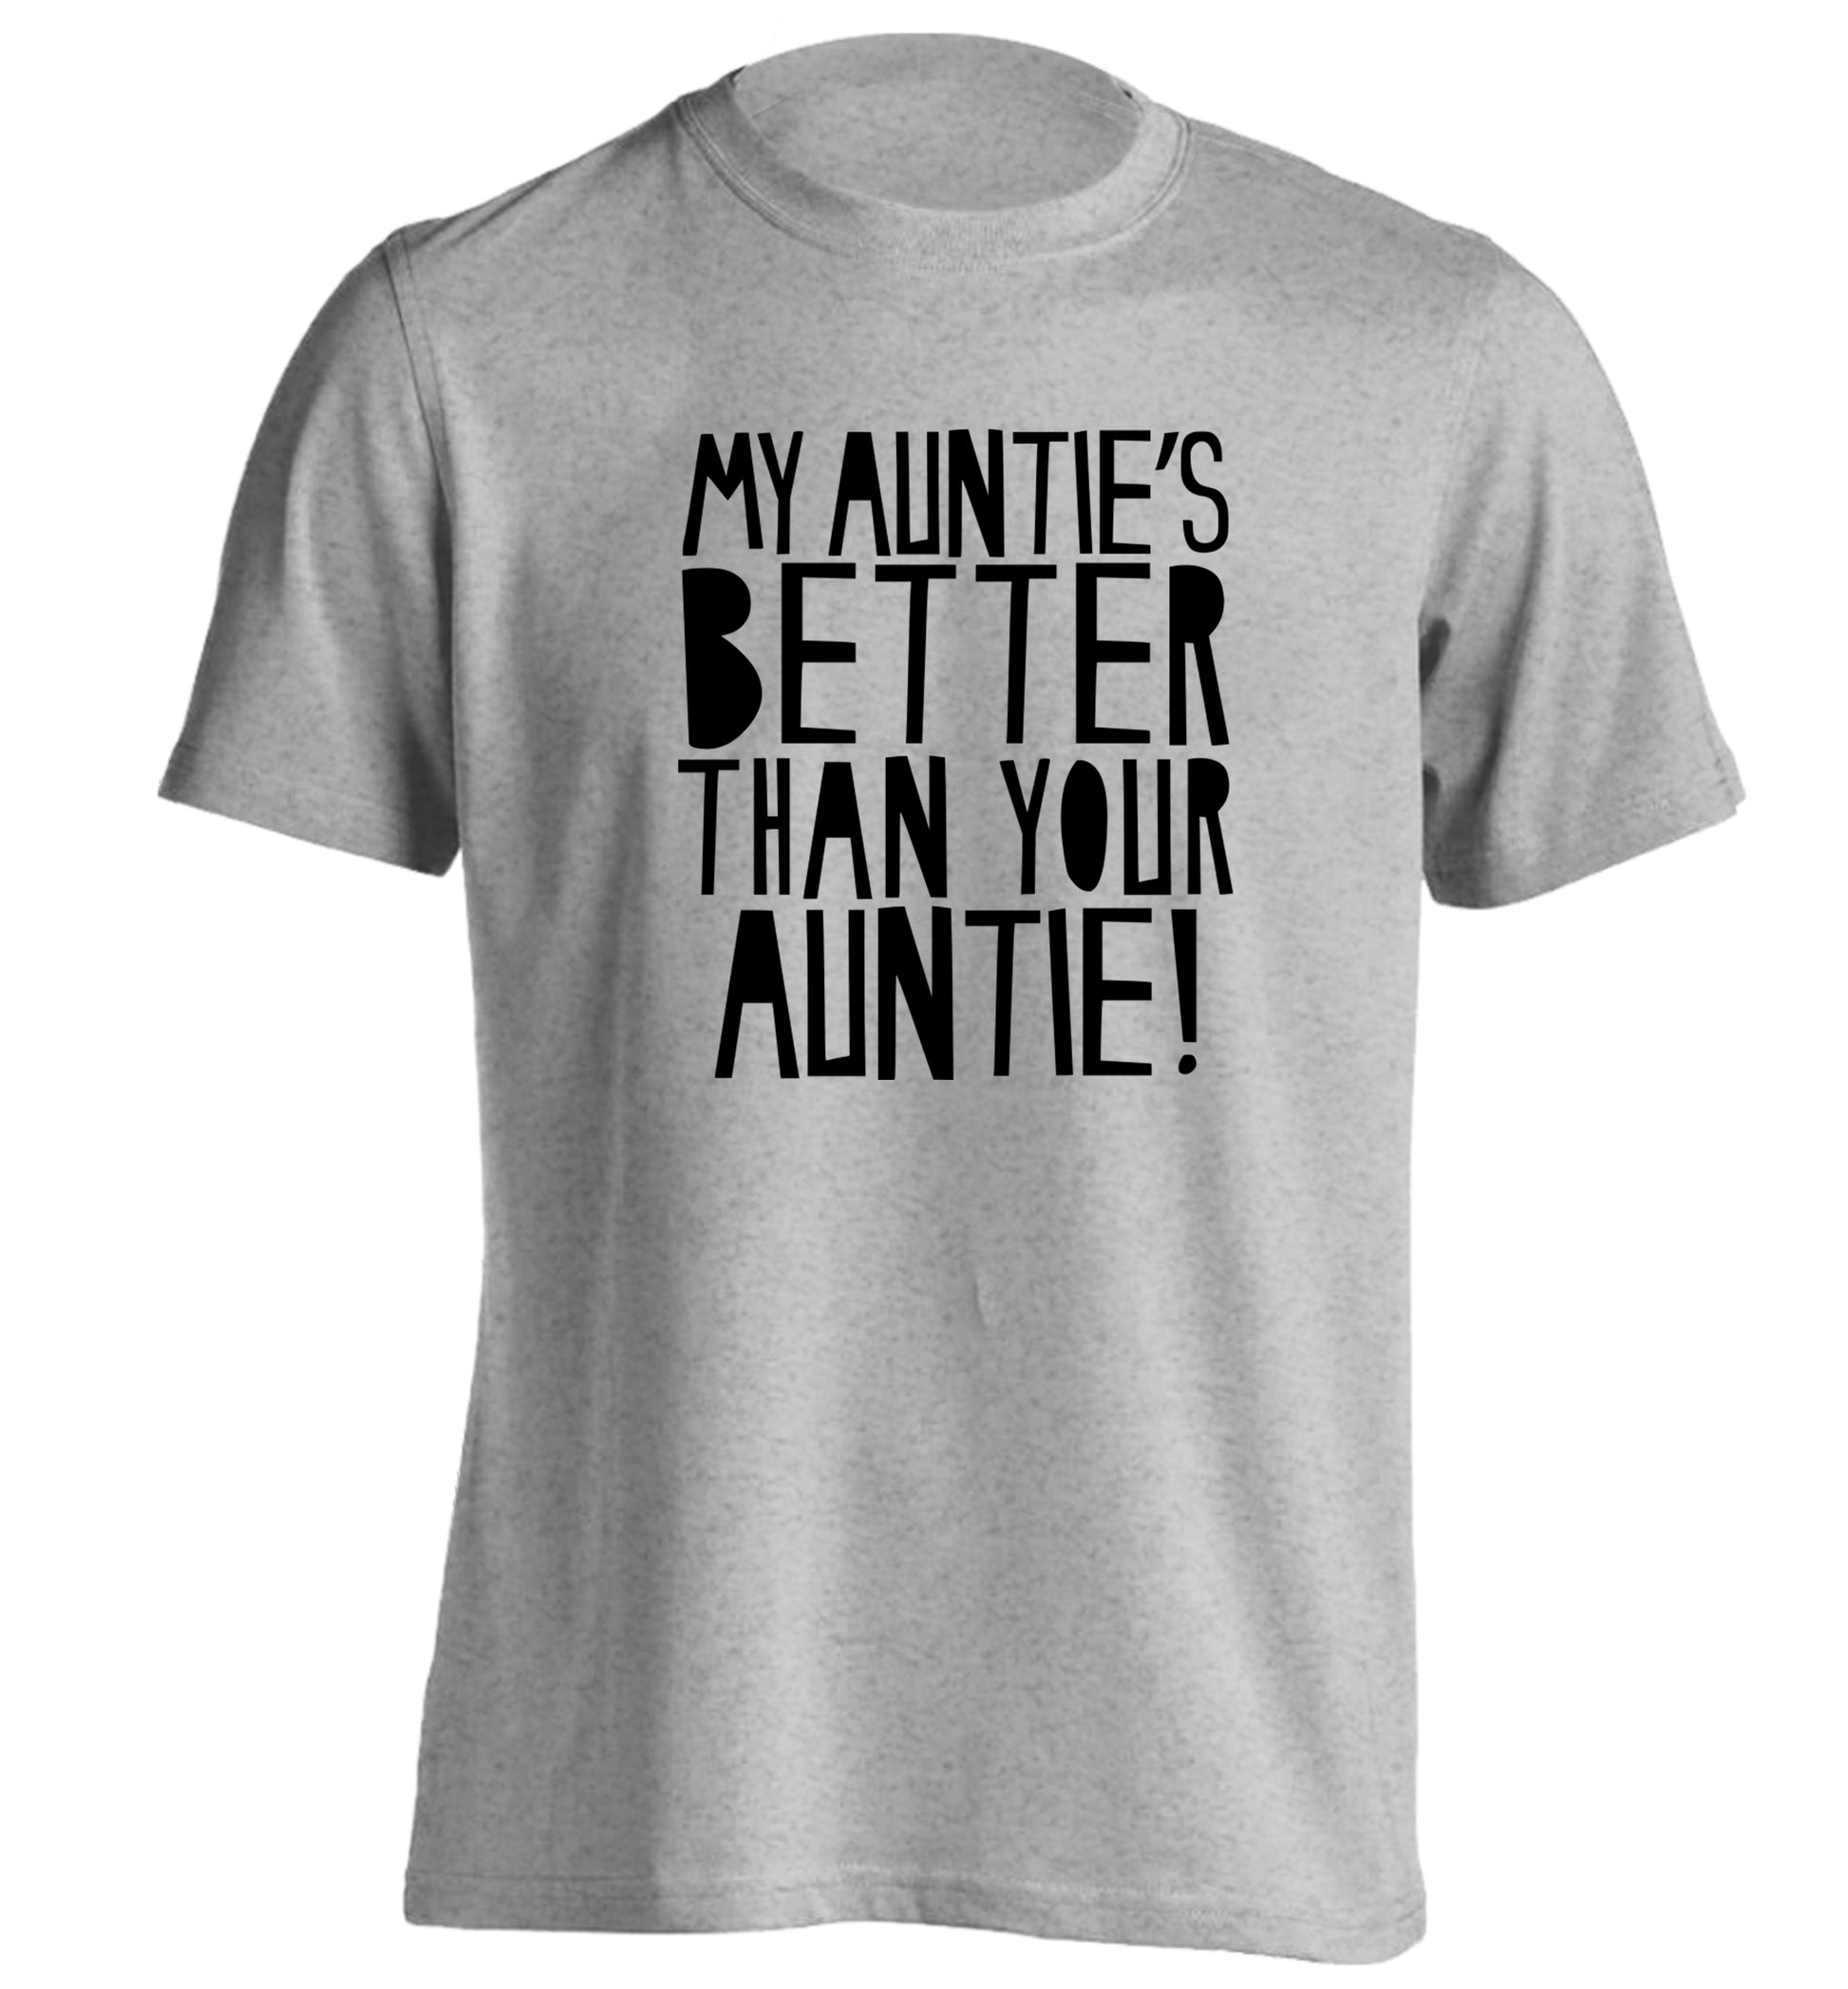 My auntie's better than your auntie adults unisex grey Tshirt 2XL